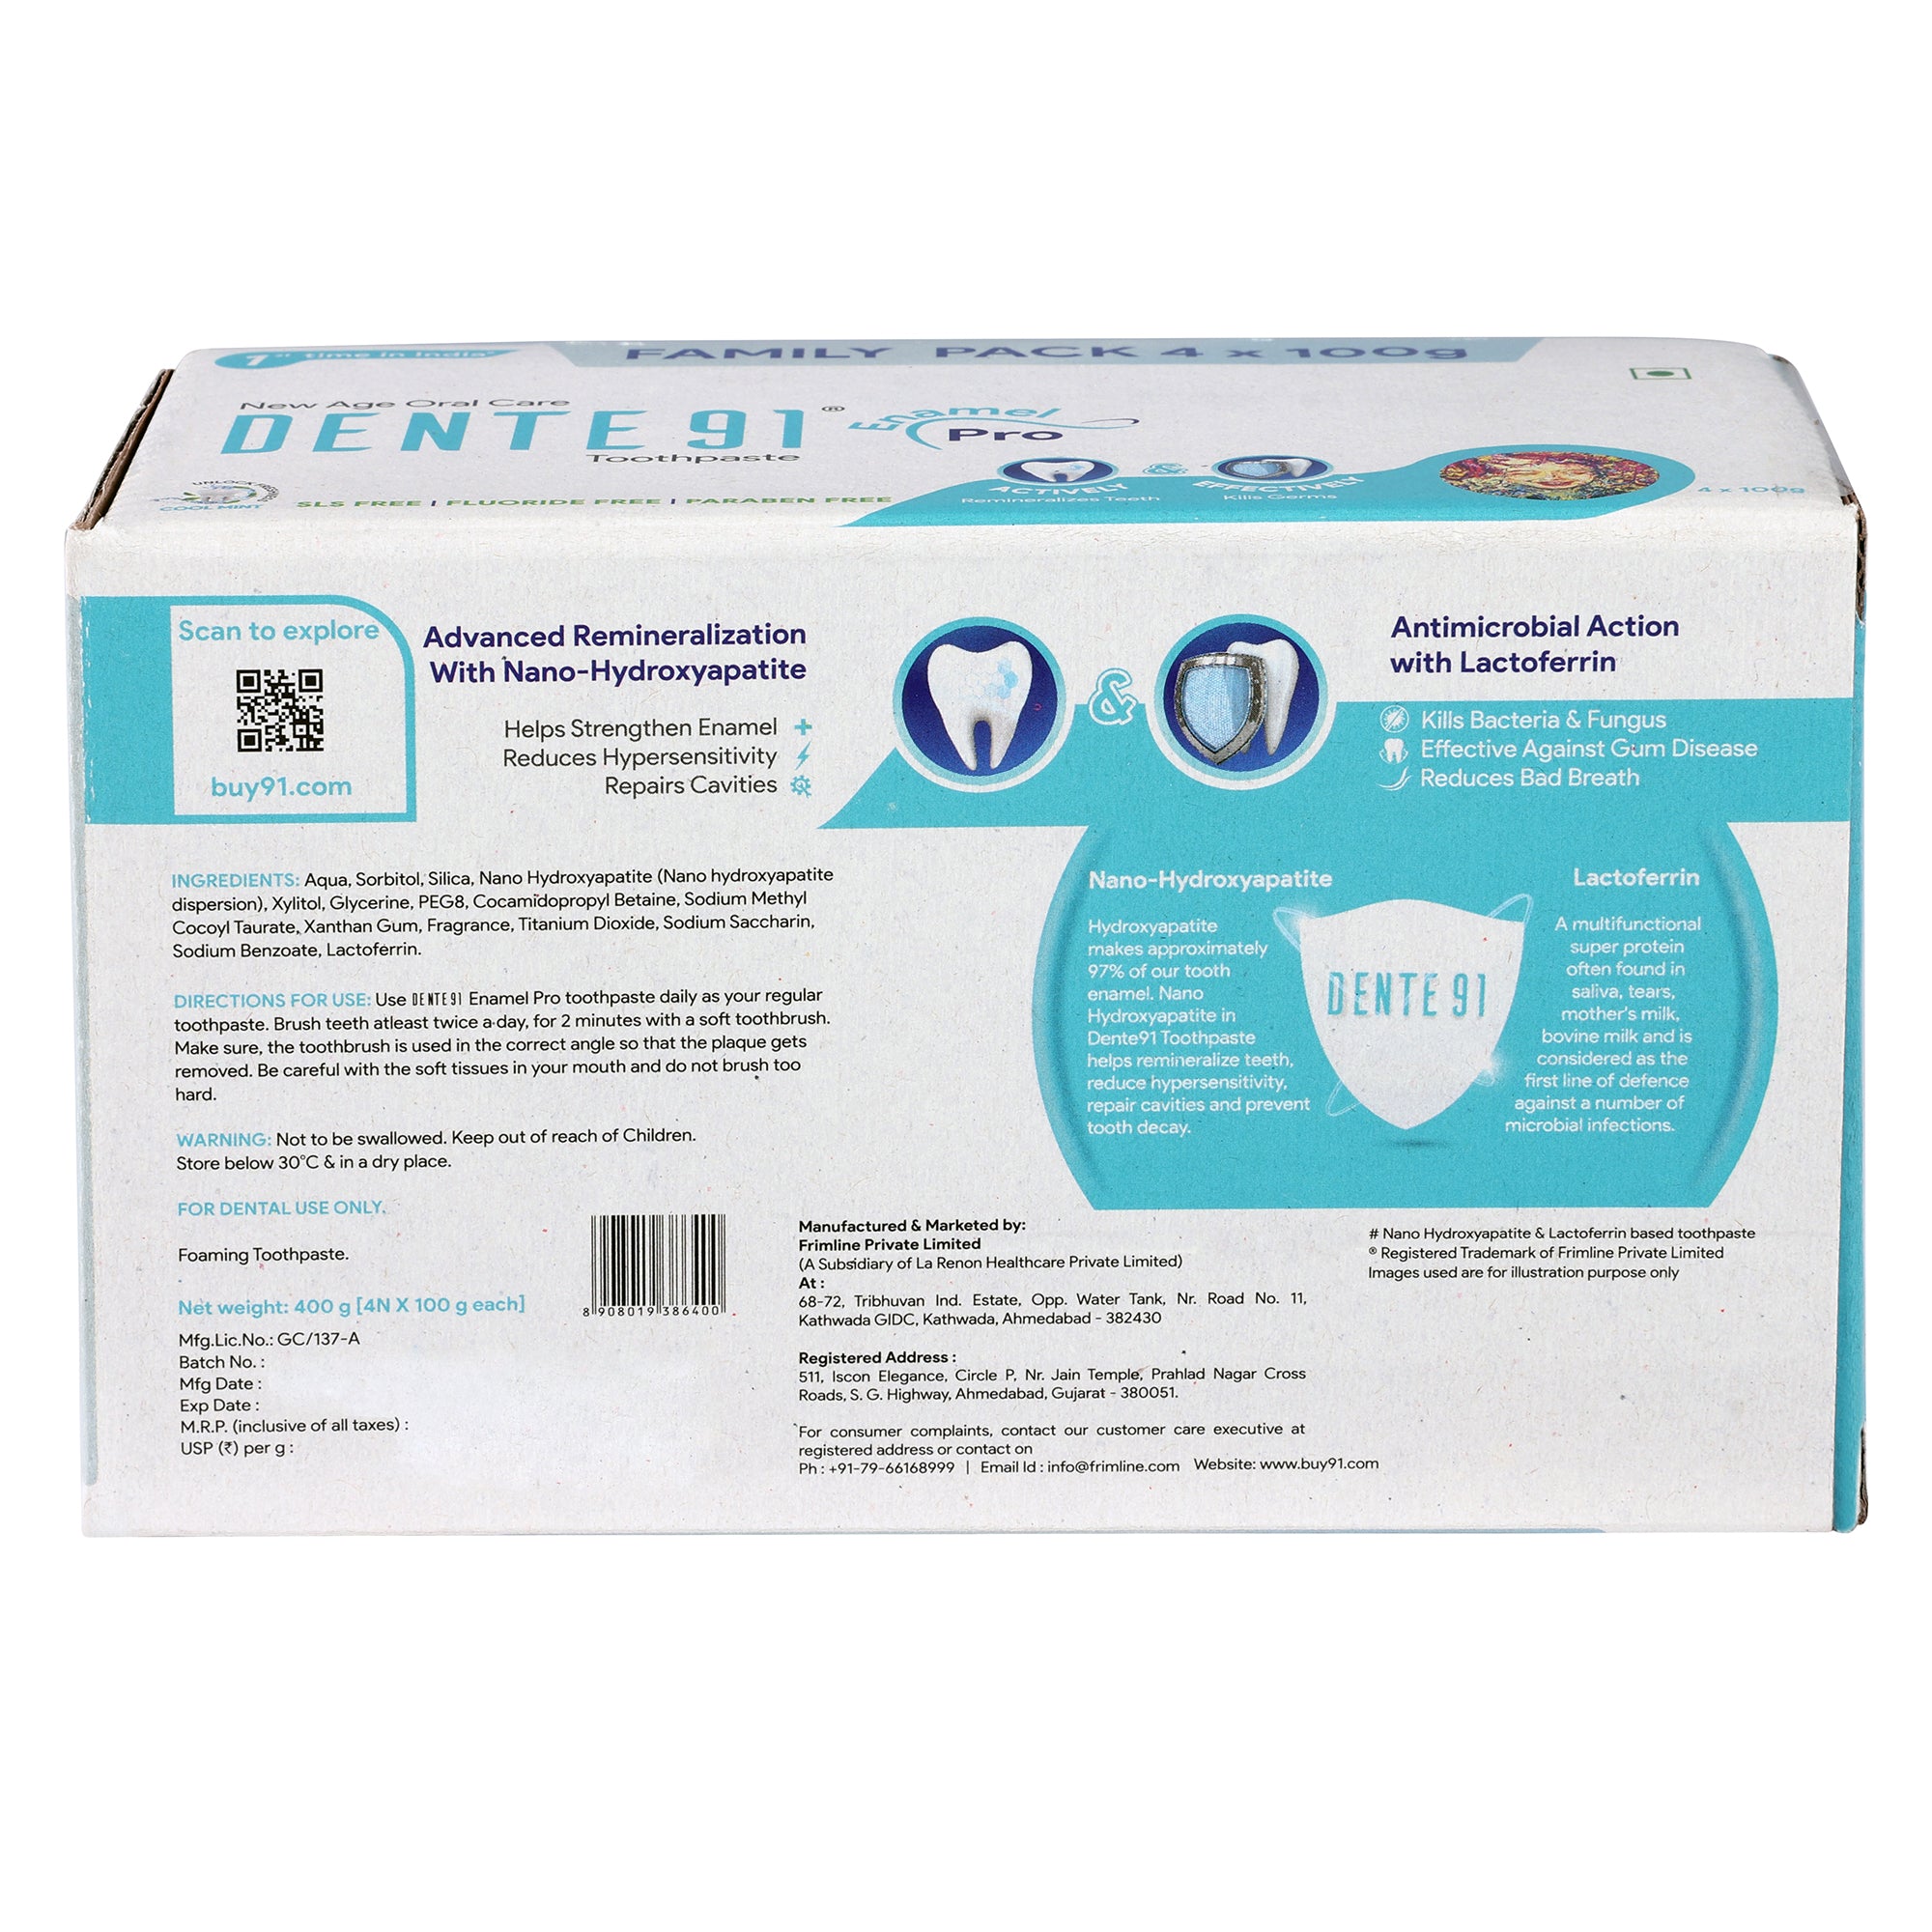 Dente91 Cool Mint Toothpaste, Strengthens Enamel, Repairs Cavities, Remineralizes Teeth , Sensitivity Relief, SLS Free, Fluoride Free, Paraben Free, Pack of 4, 400g